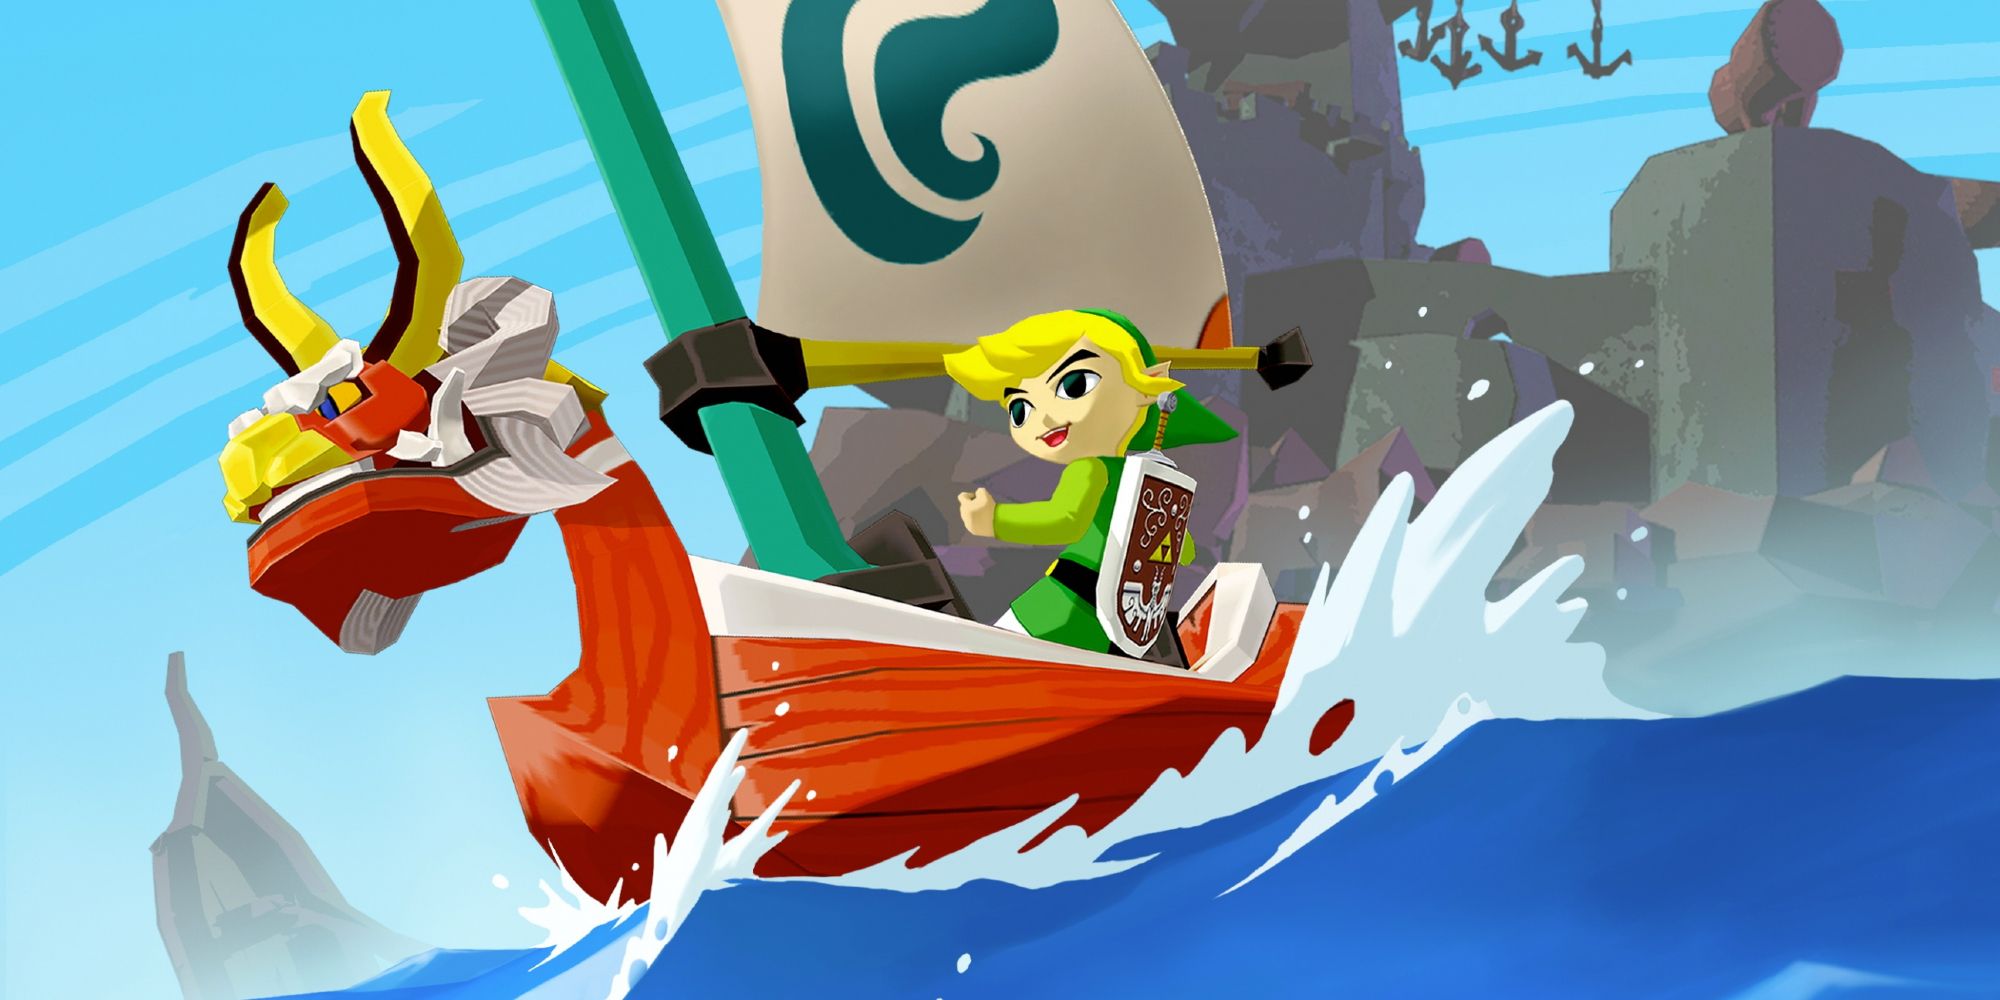 Link riding in the King of Red Lions boat in The Wind Waker.